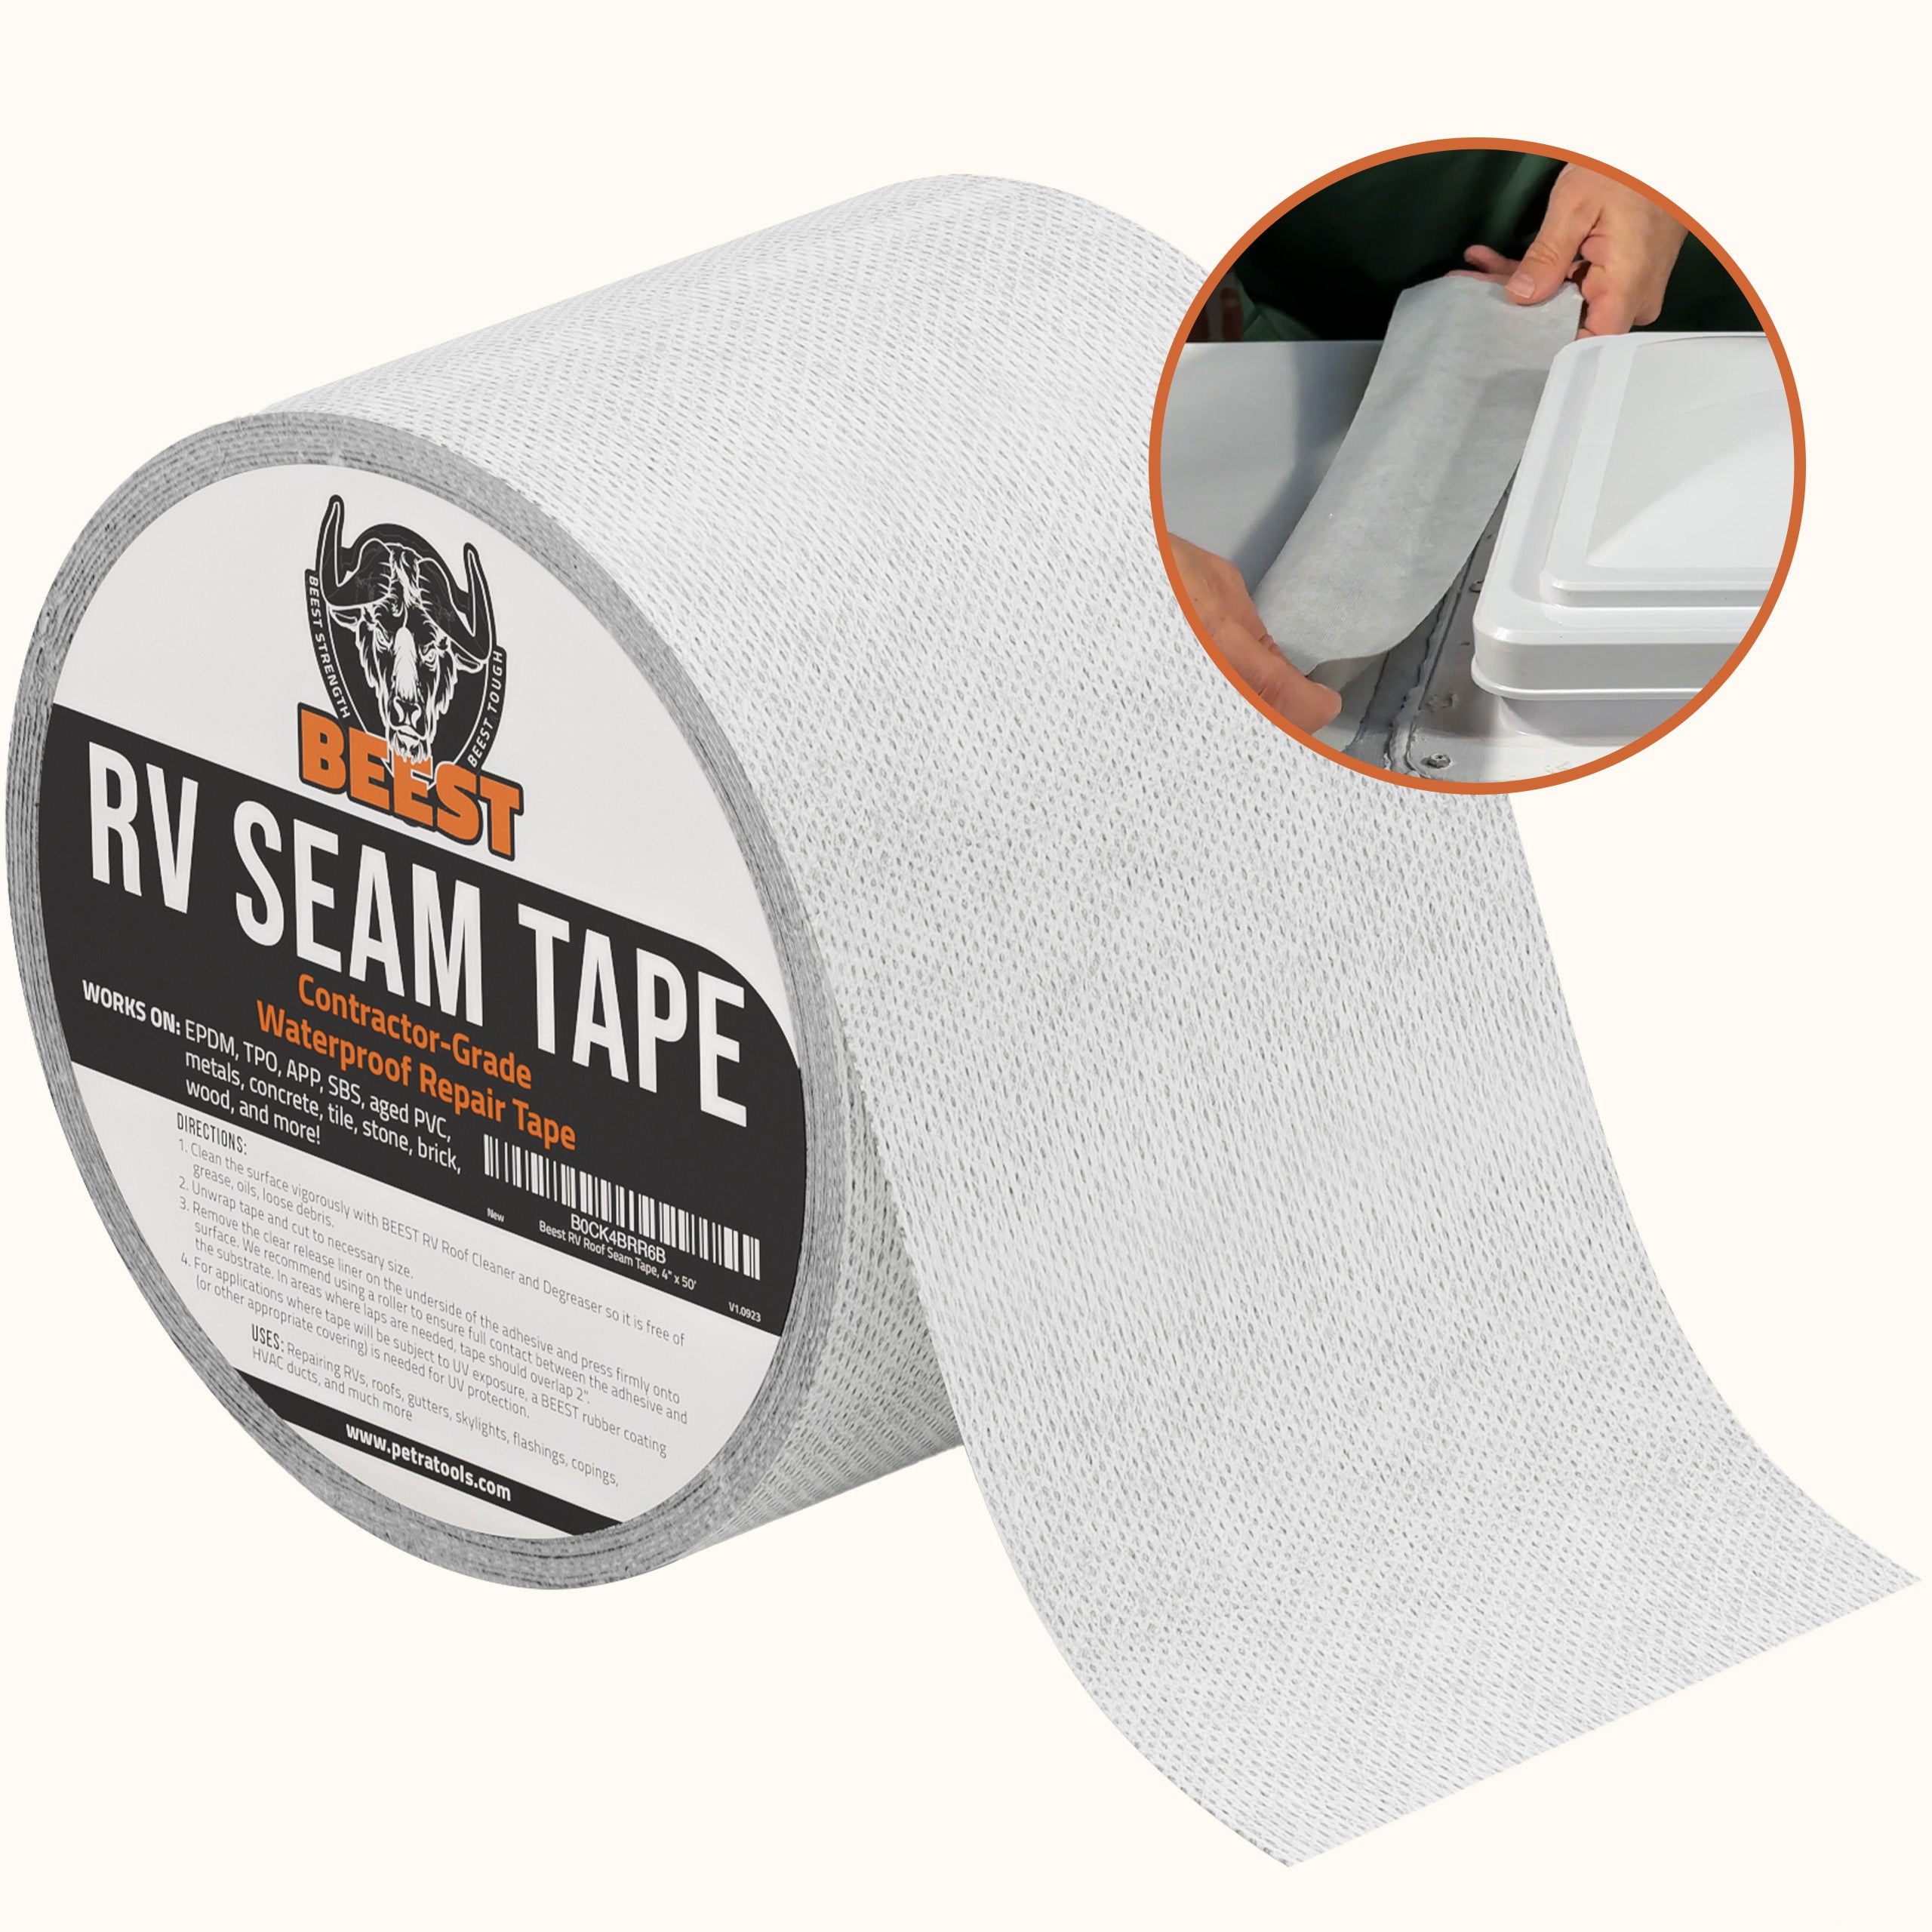 Beest RV Seam Tape - Waterproof Tape & RV Roof Sealant - Patch, Repair & Seal Leaks Quickly & Permanently: Roofing Tape for EPDM, TPO, Metal & More!